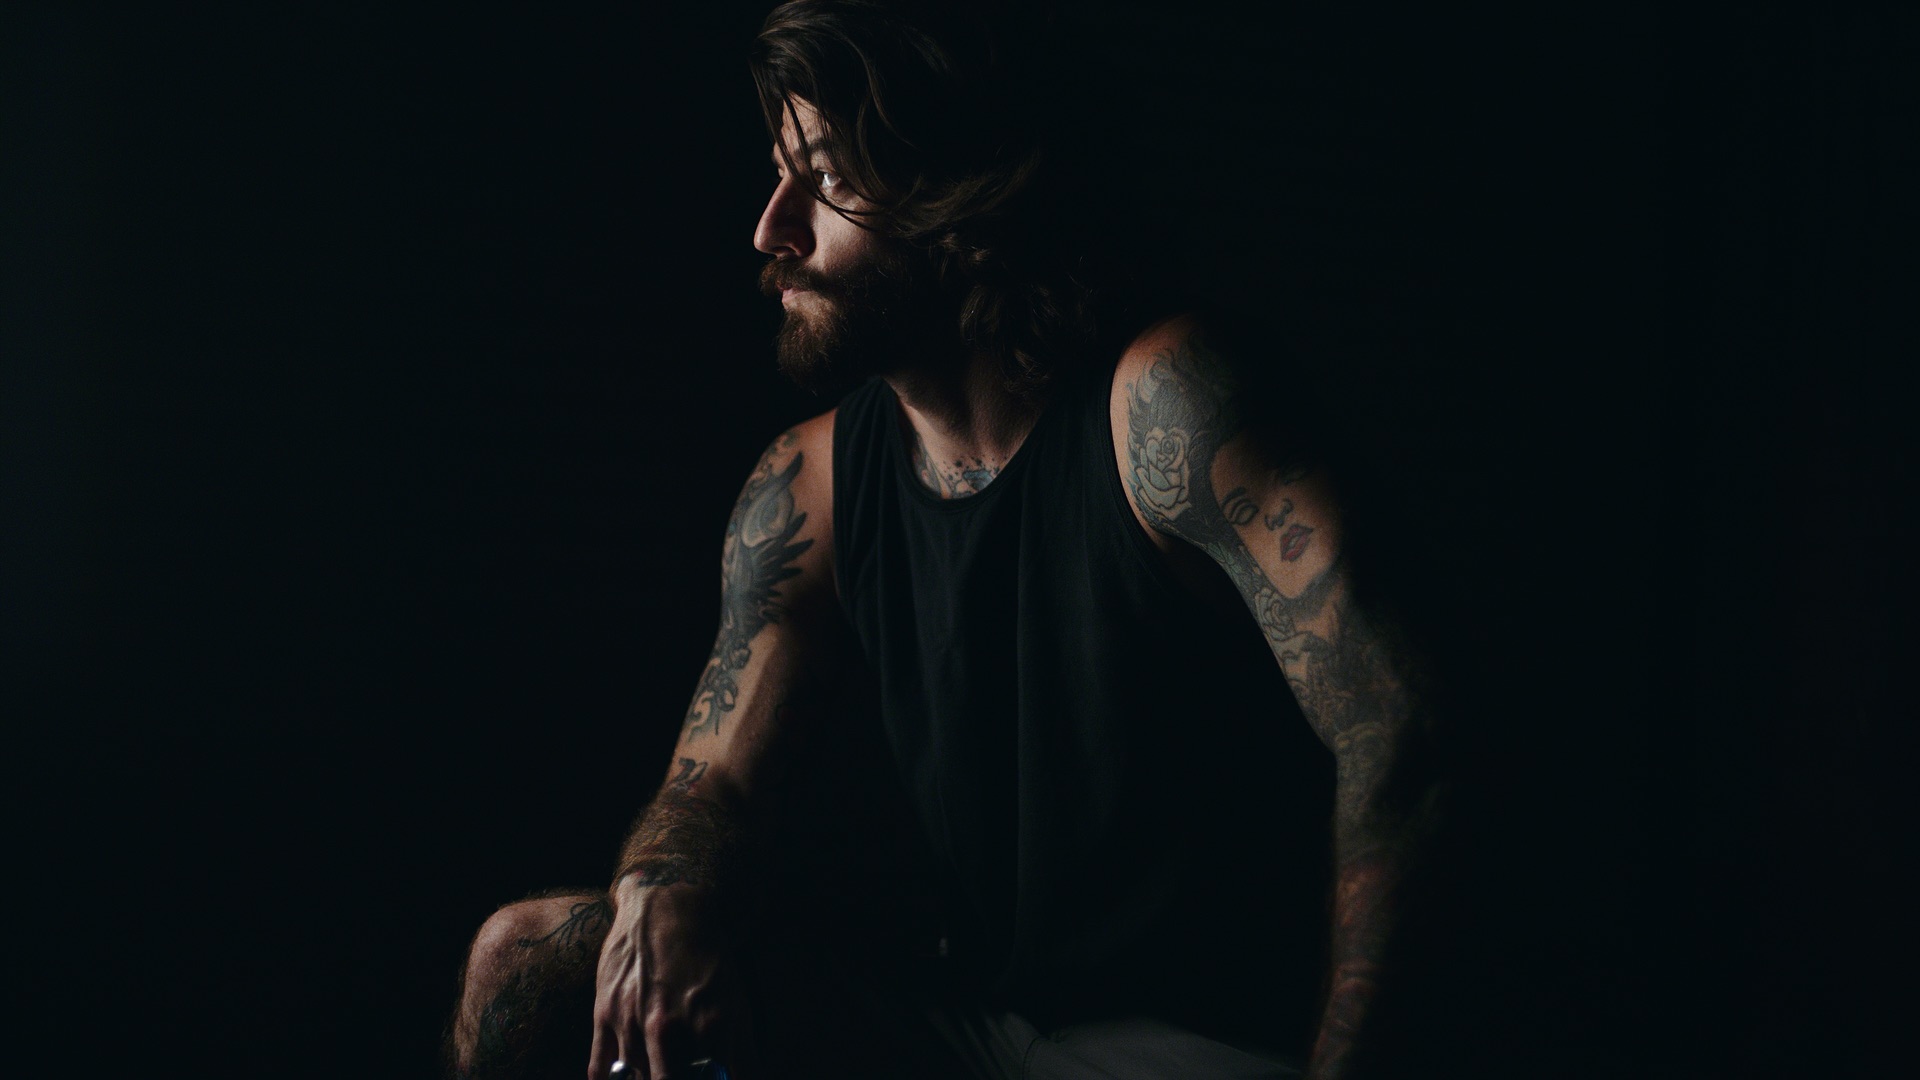 IU C&I Studios Page Luke Adams Crew Call the Tattoo Project Promo Man with beard and tattoos wearing a black tank top posing for the camera in semi darkness looking off to the side